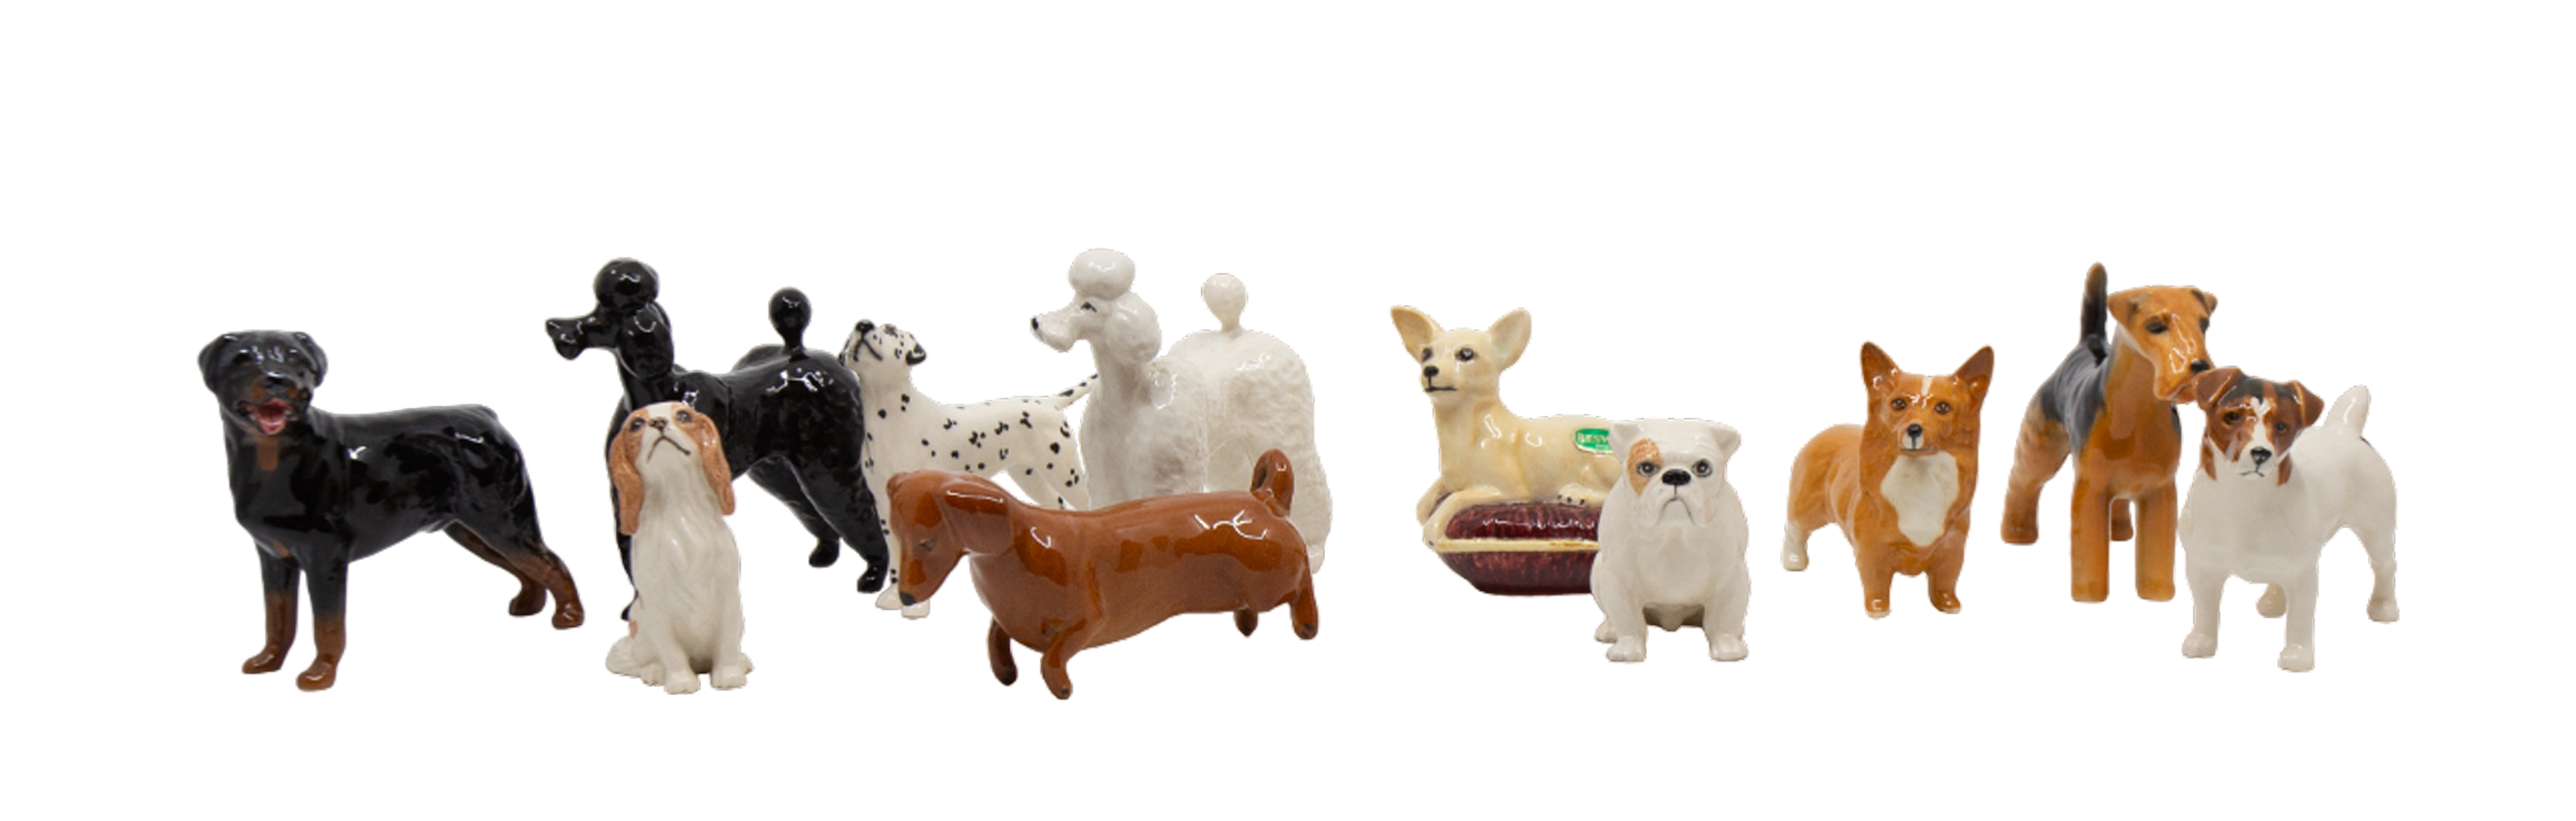 Collection of mixed small dog breeds by John Beswick, no boxes, eleven in total.